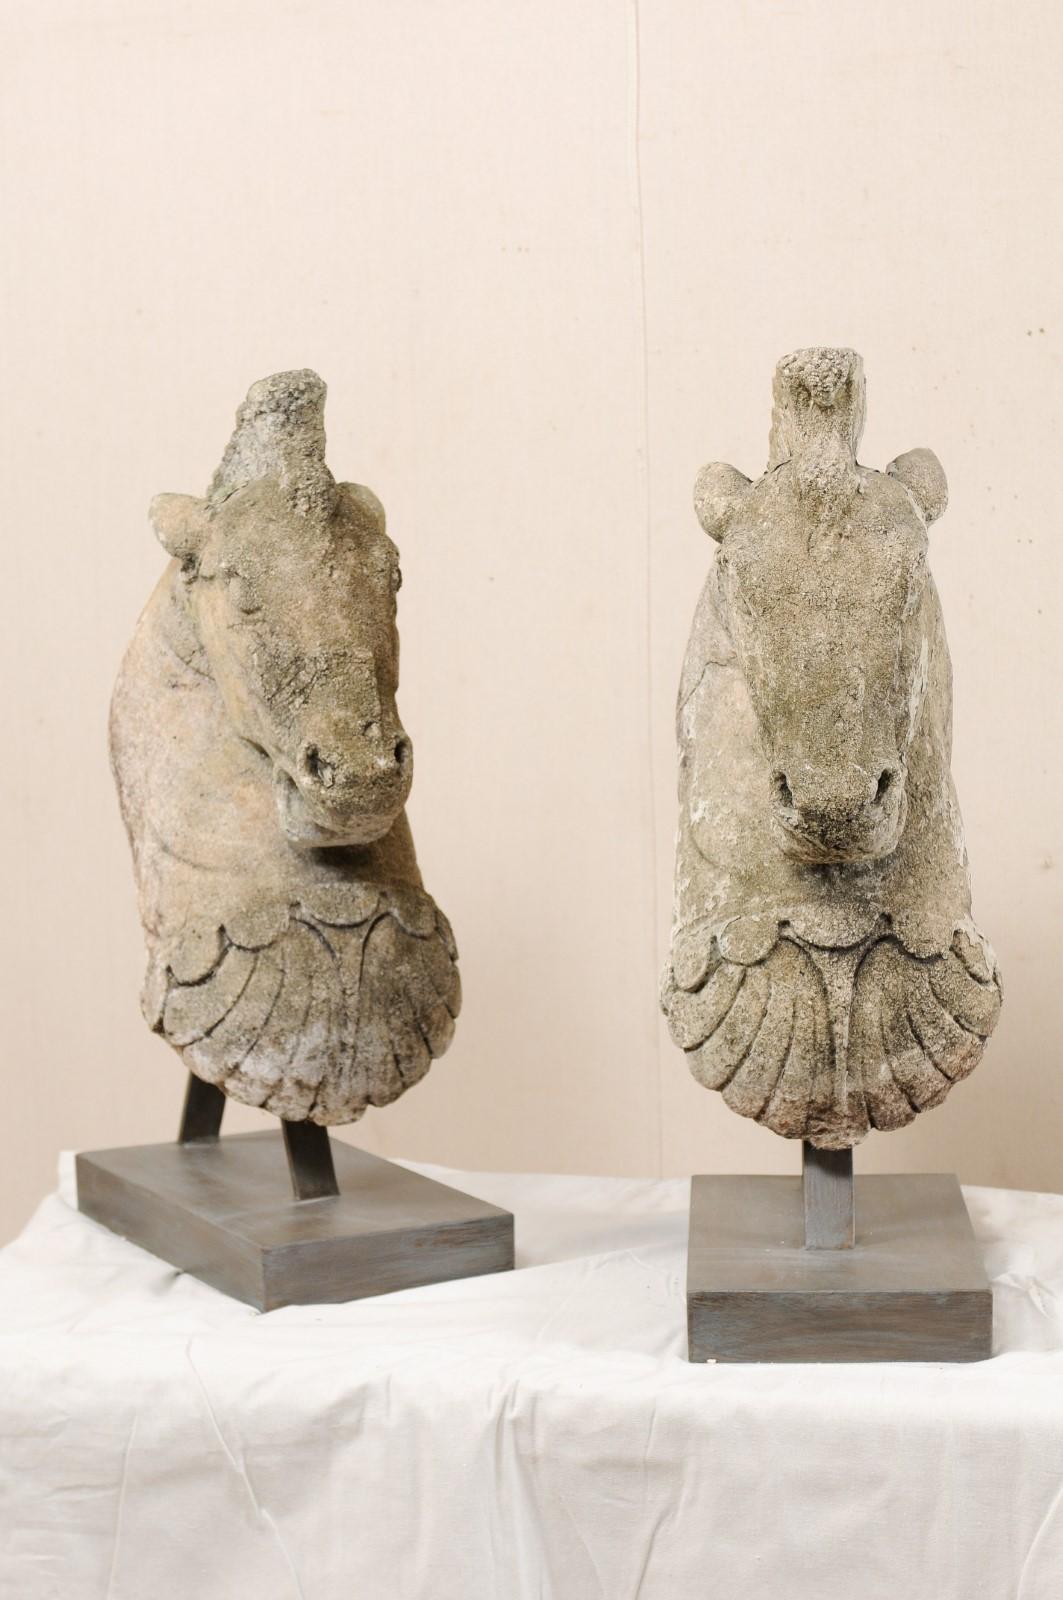 A pair of 19th century European sculptural horse heads of cast stone, mounted on custom stands. These fabulous art pieces, standing just shy of 3 feet in height, have been custom fashioned from a pair of 19th century cast-stone horse heads, which